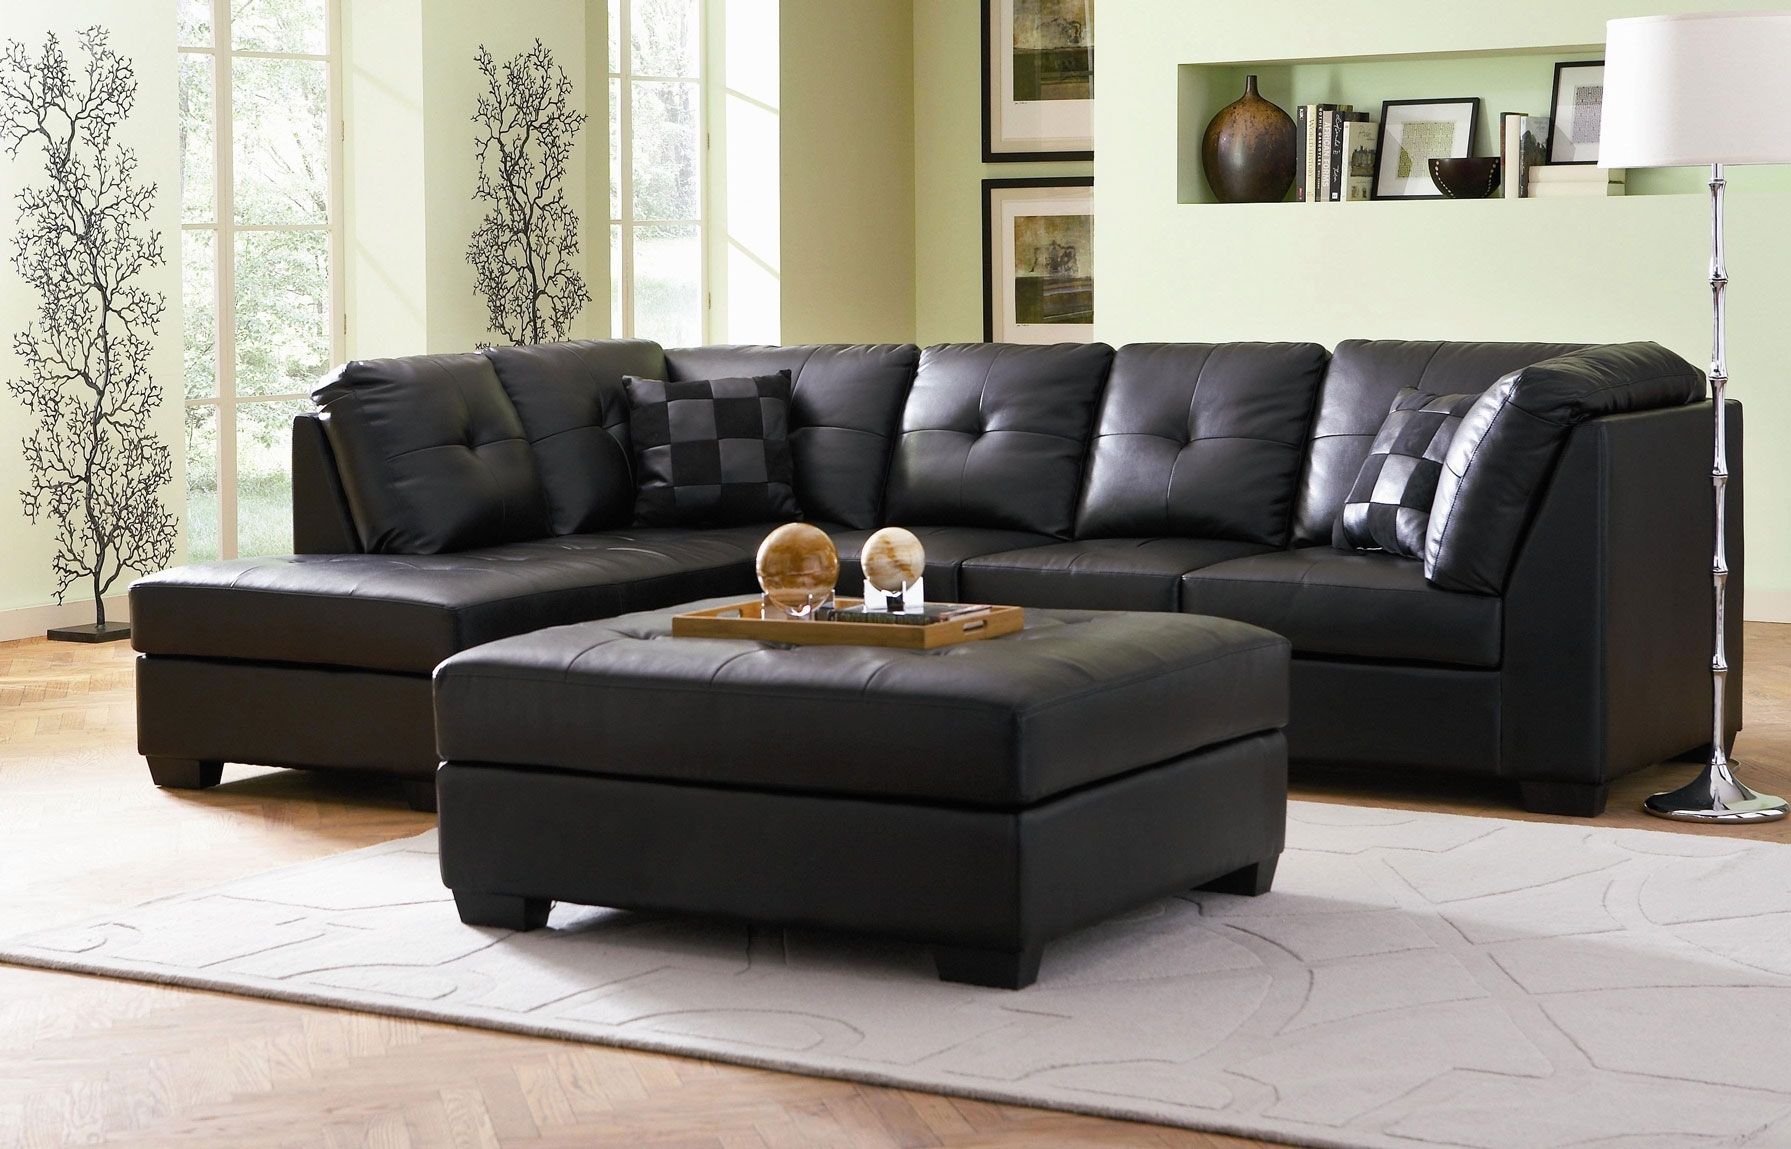 Sectional Sofa. Best Quality Sectional Sofas Jacksonville Fl In Jacksonville Fl Sectional Sofas (Photo 5 of 10)